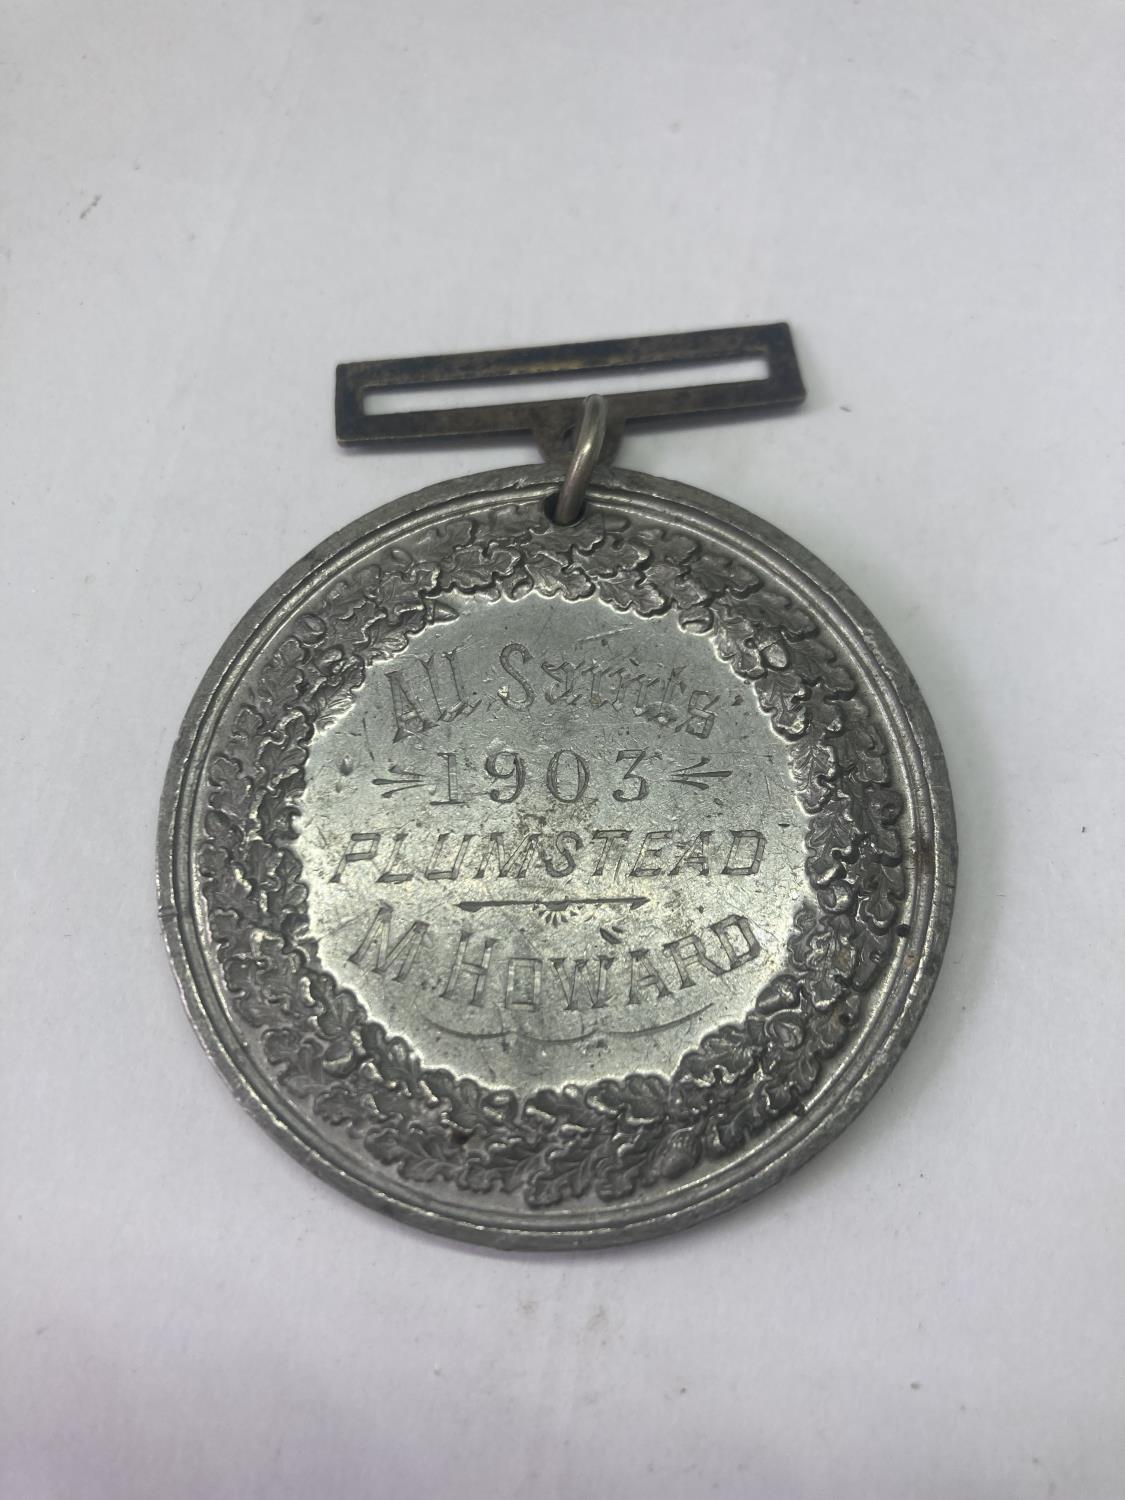 A SERVICE MEDAL DATED 1903 - Image 2 of 4